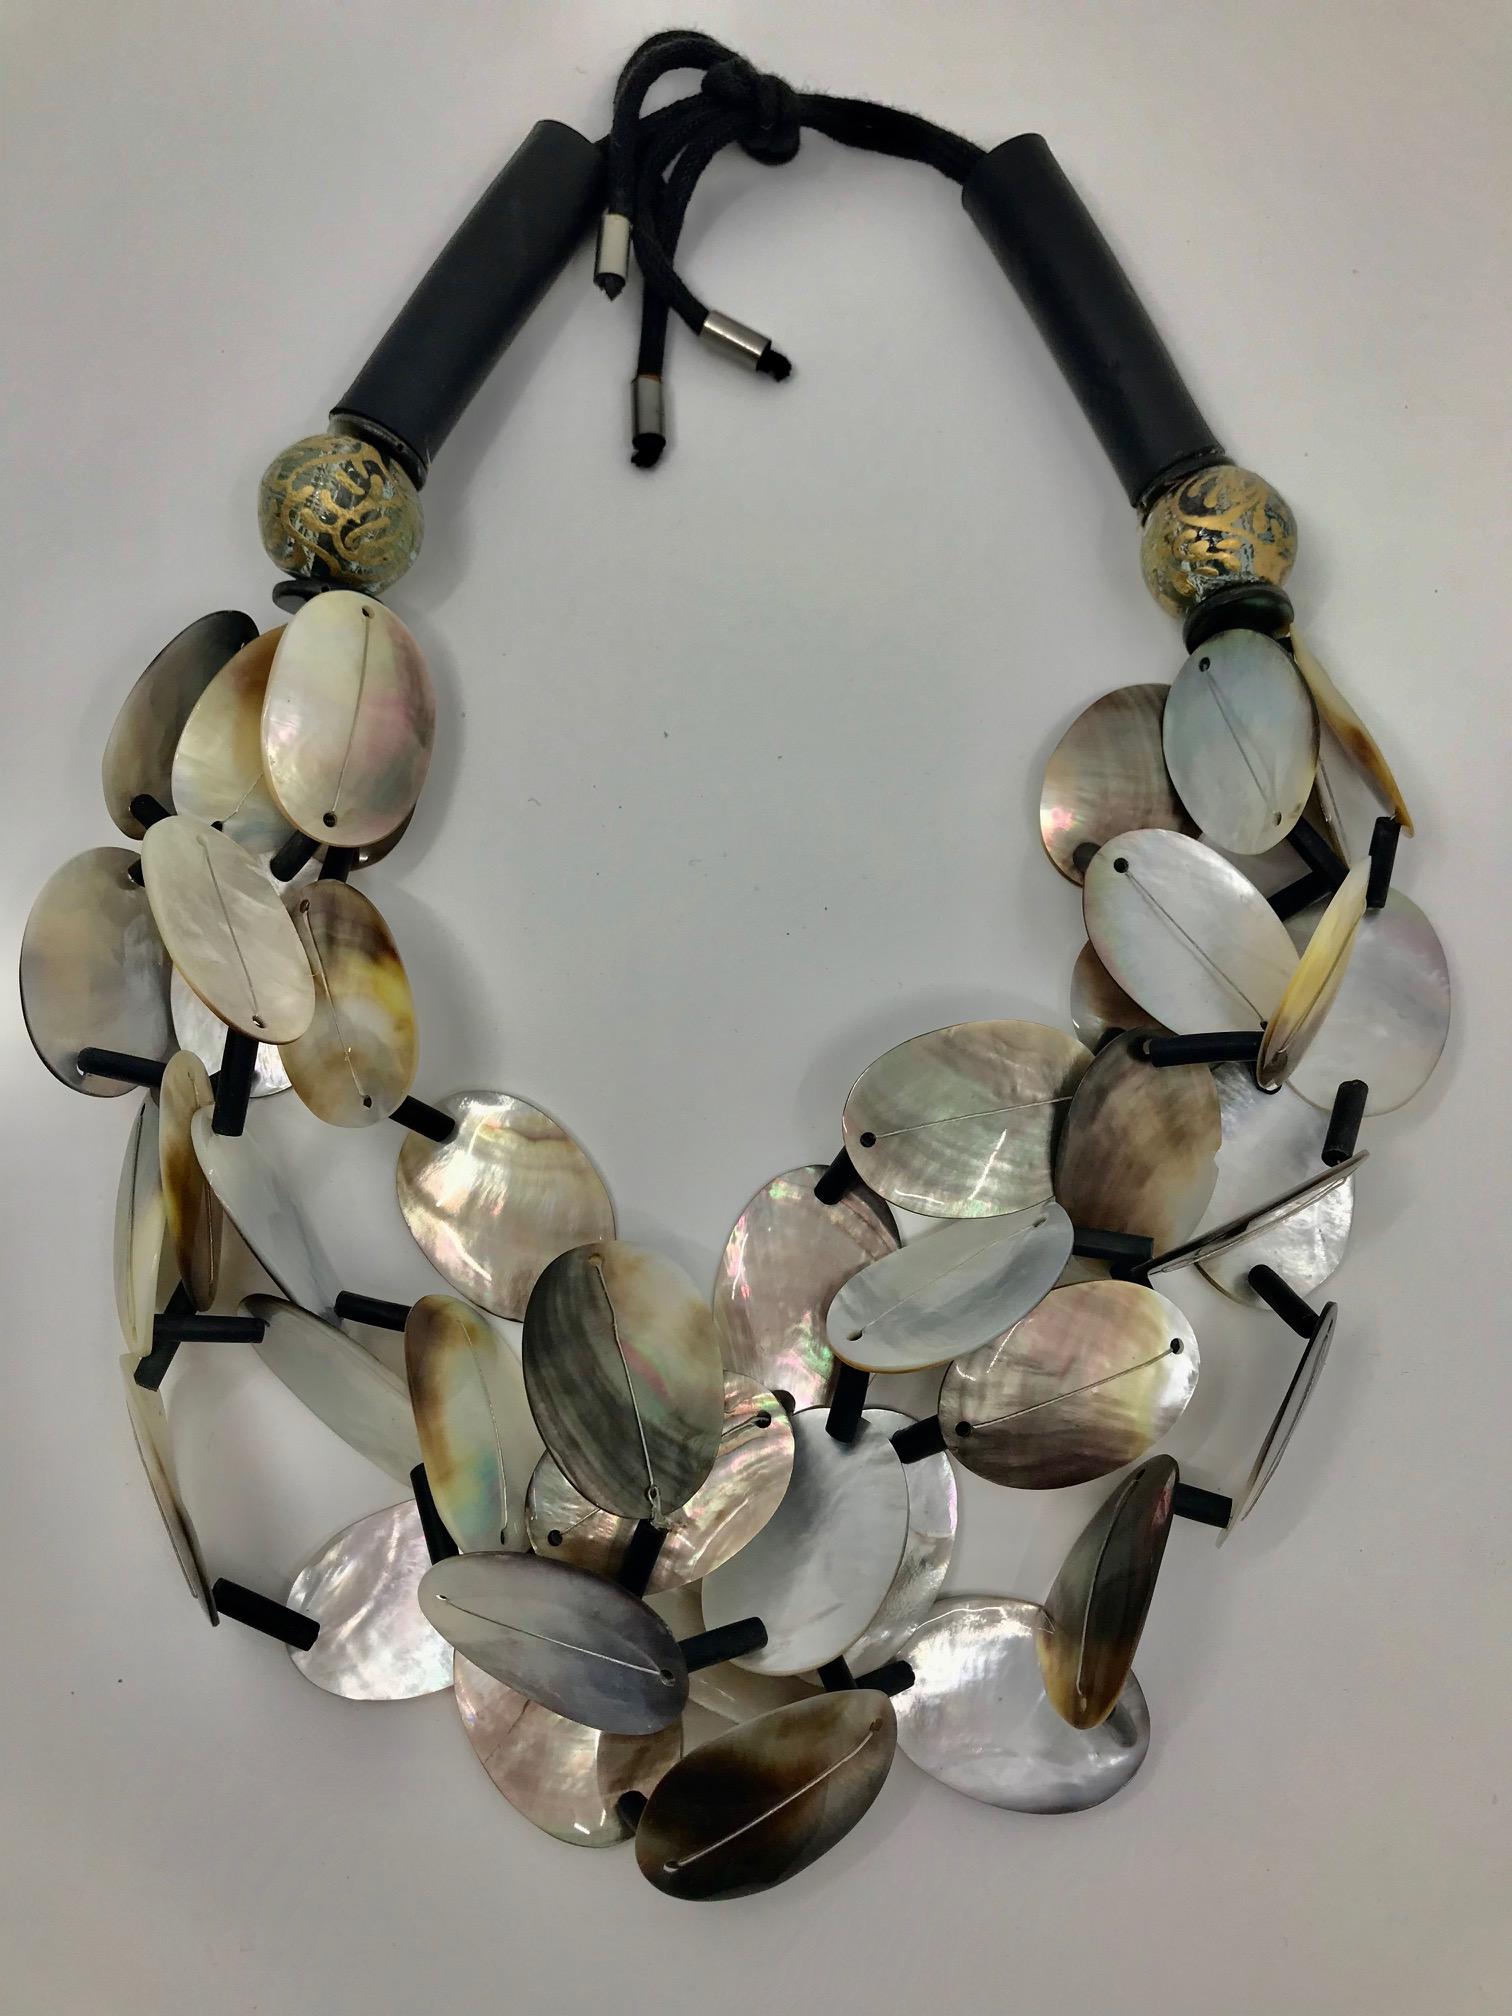 Black Mother of Pearl MultI ,4 strand Statement necklace , consists of large oval black M.O.P beads arranged  in three dimensional fashion. Black wooden tubular beads are used as spacers and the ends are finished with large ,in gold hand painted